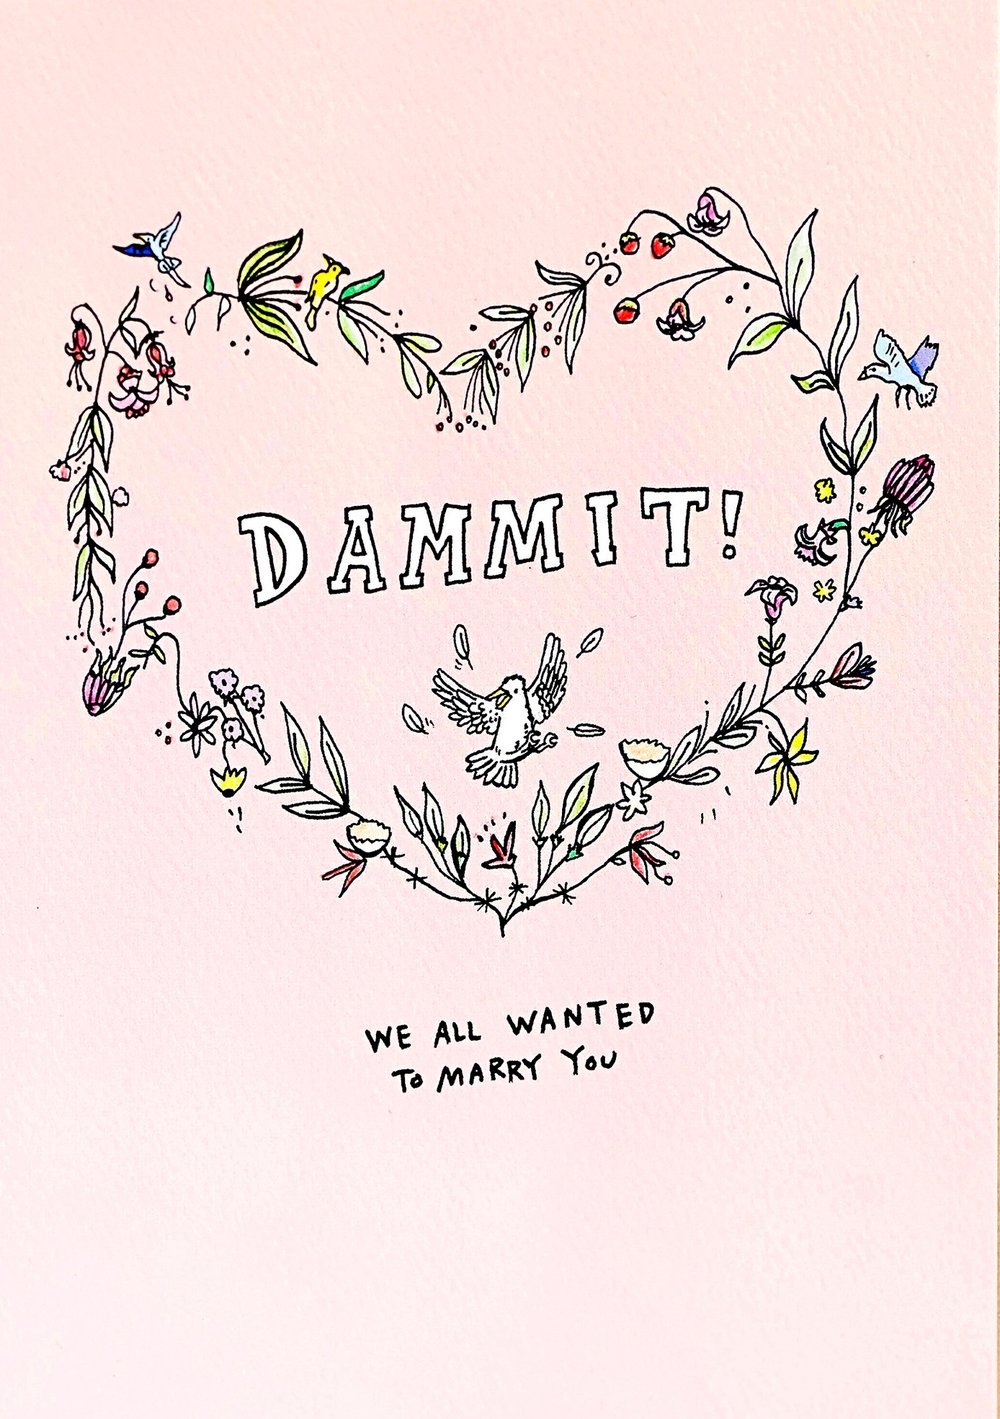 Dammit - Wally Paper Co